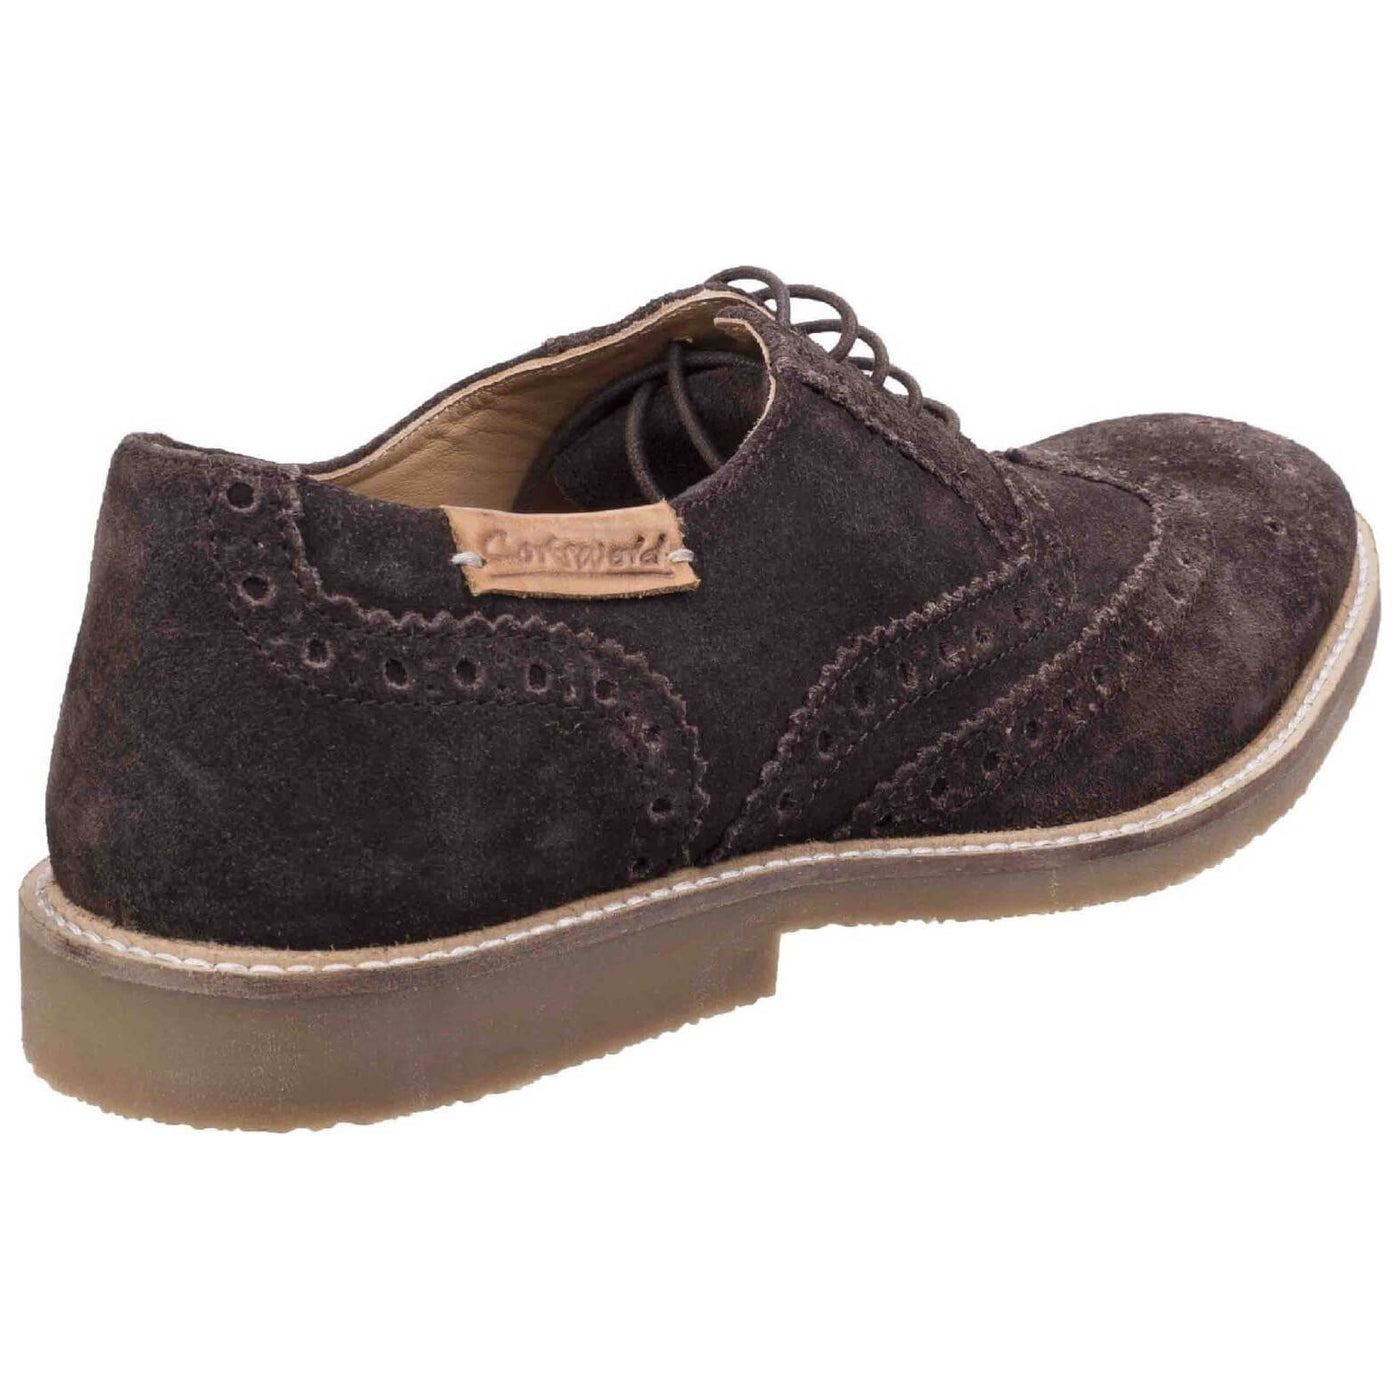 Cotswold Chatsworth Suede Wingtip Shoes-Brown-2